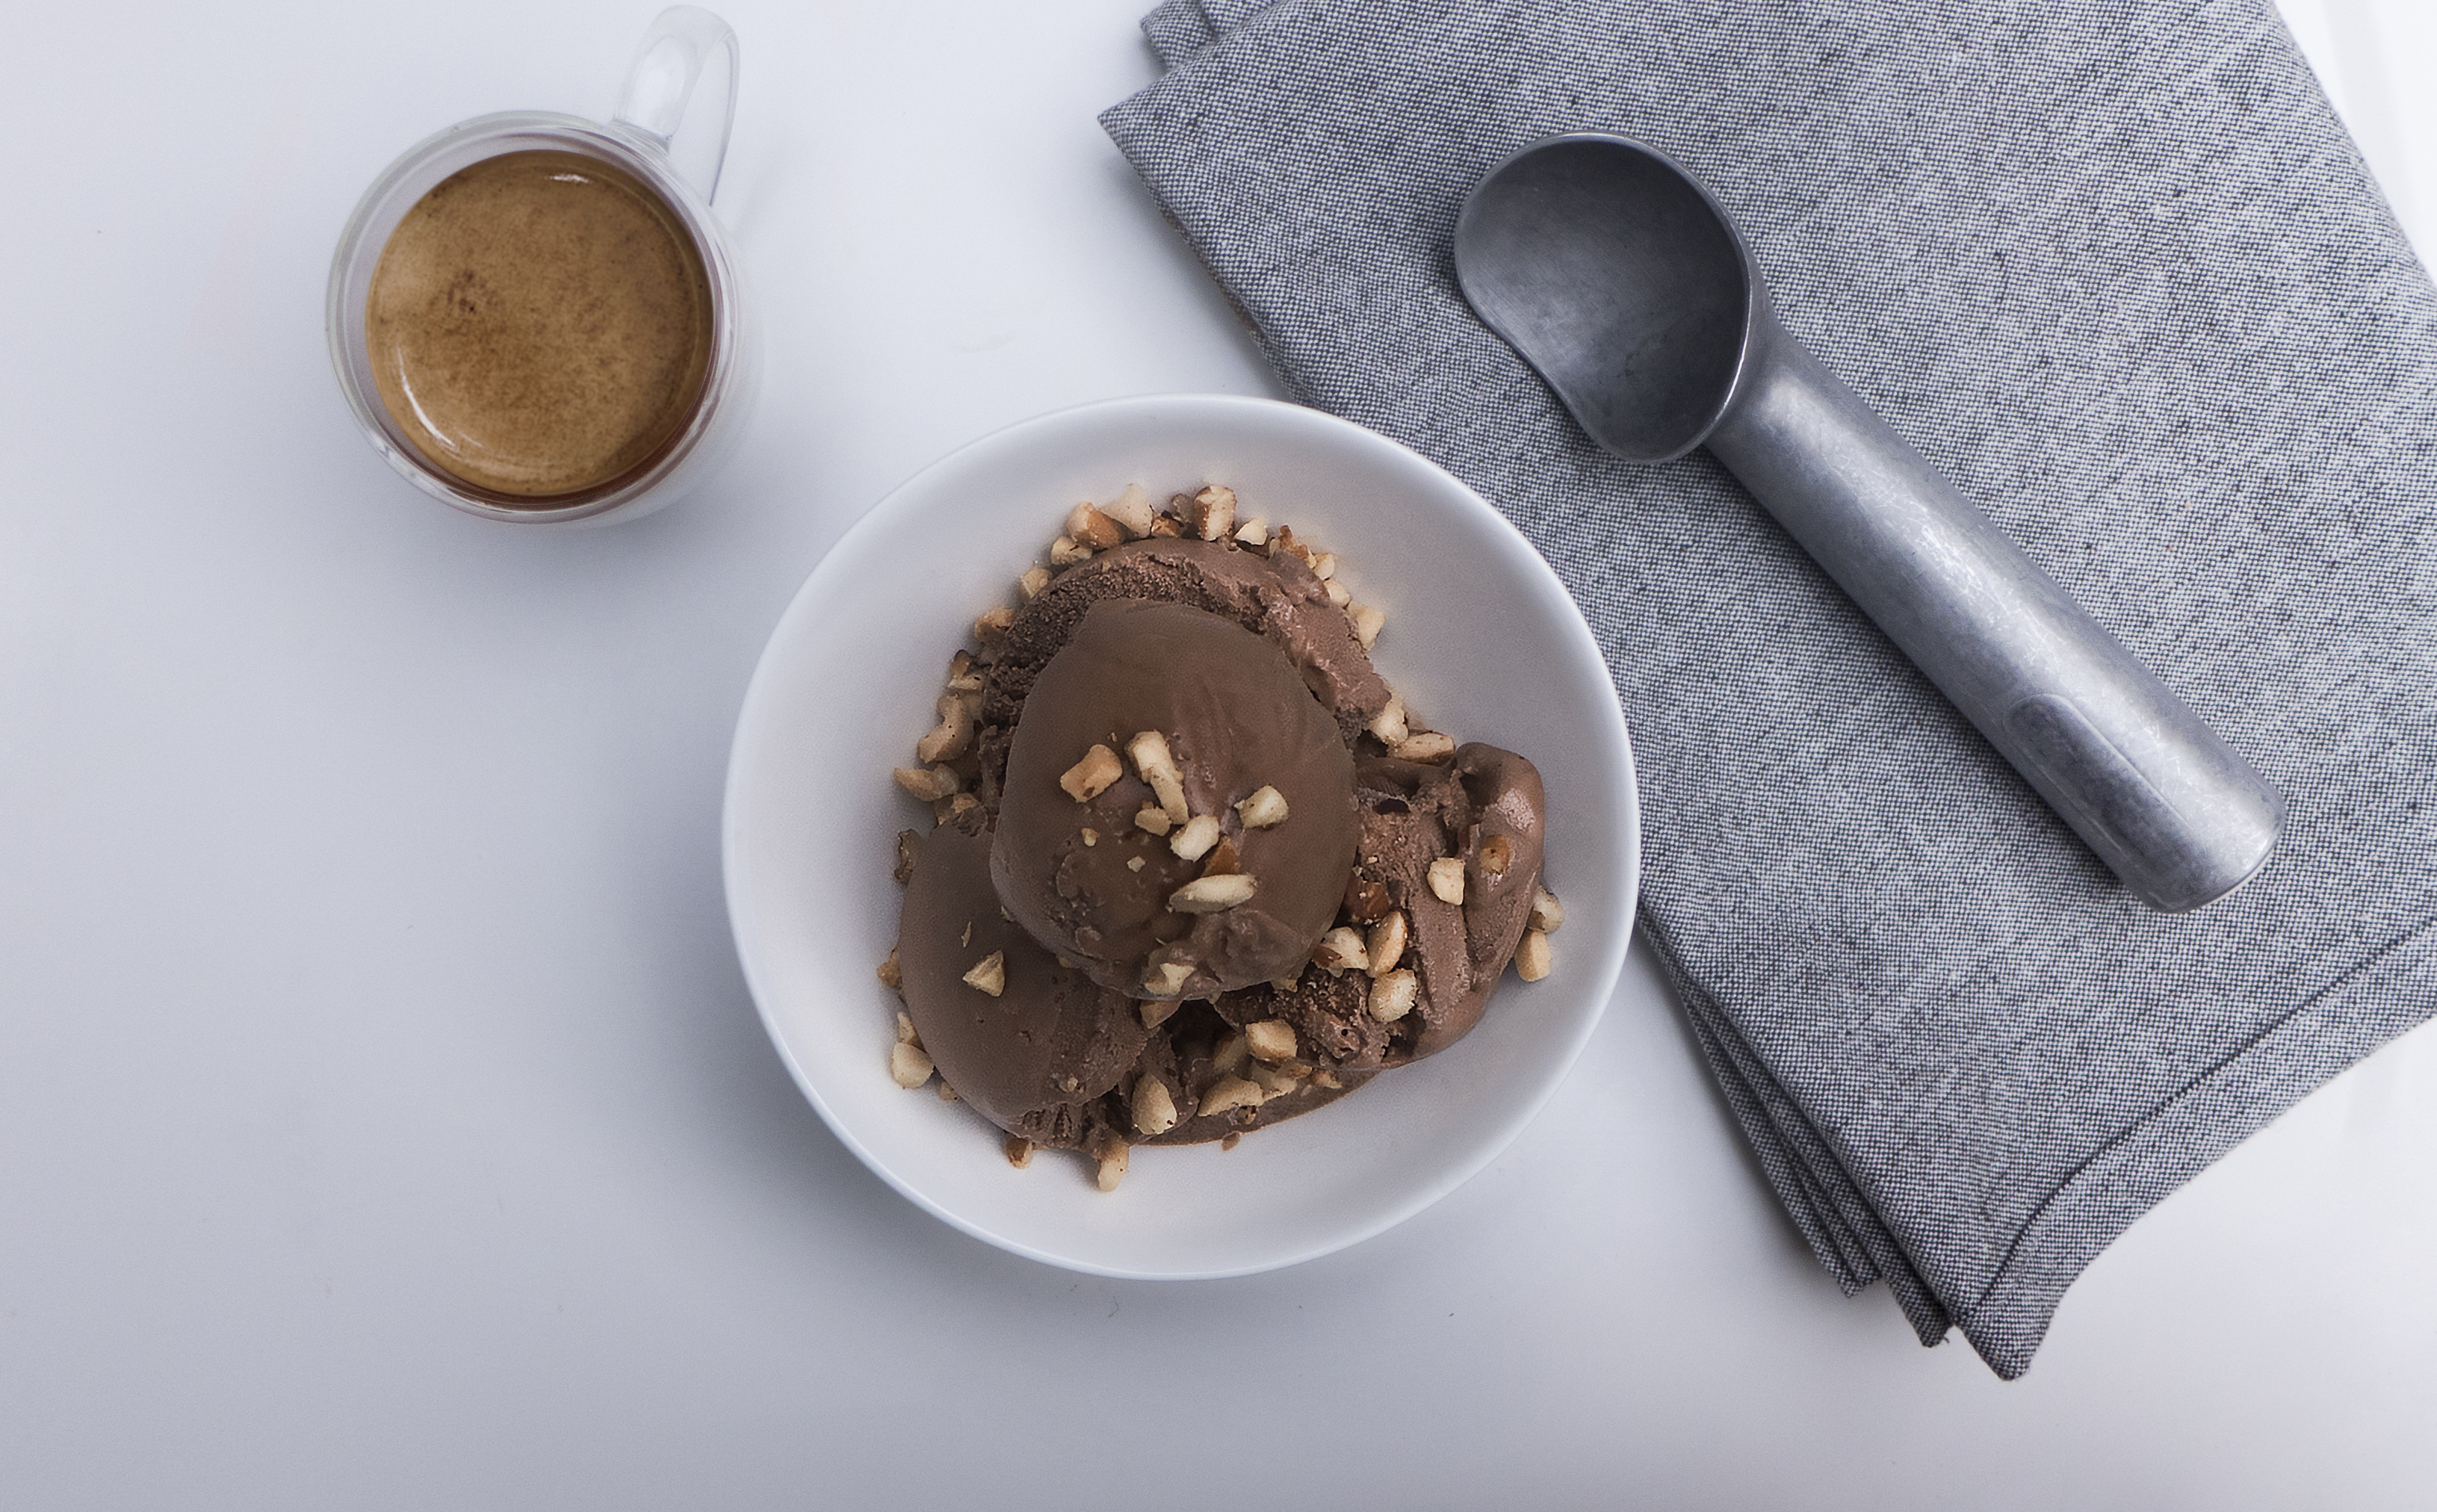 Decadent Dairy-Free Chocolate and Peanut Butter “Nice” Cream